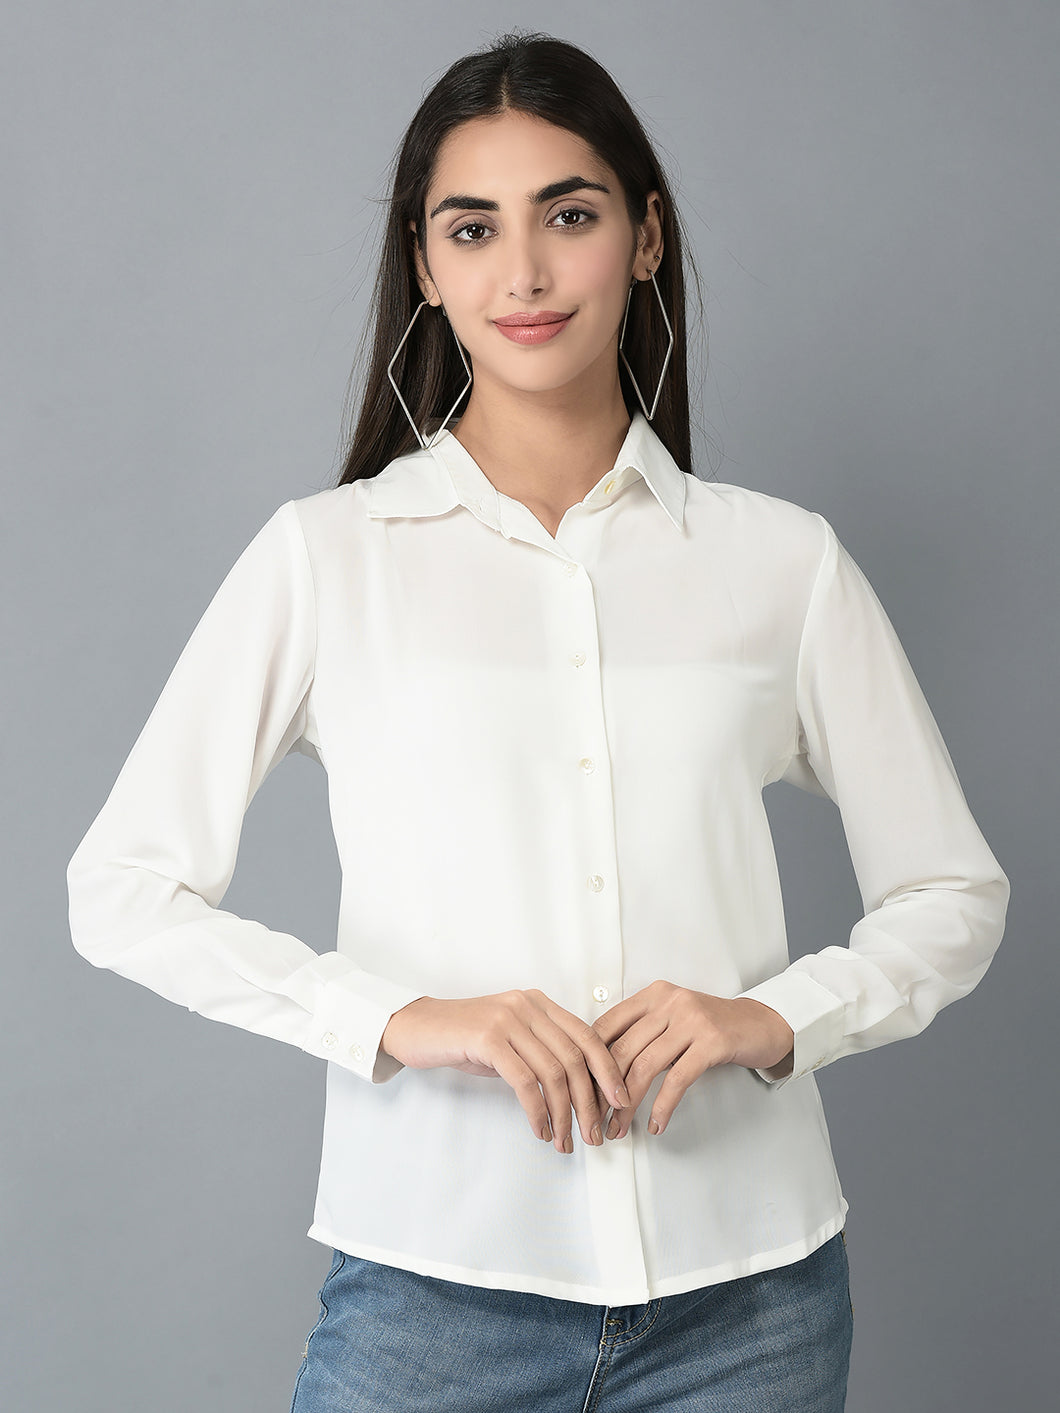 Copy of Copy of Canoe Women Drop Shoulder Sustainable Casual Shirt